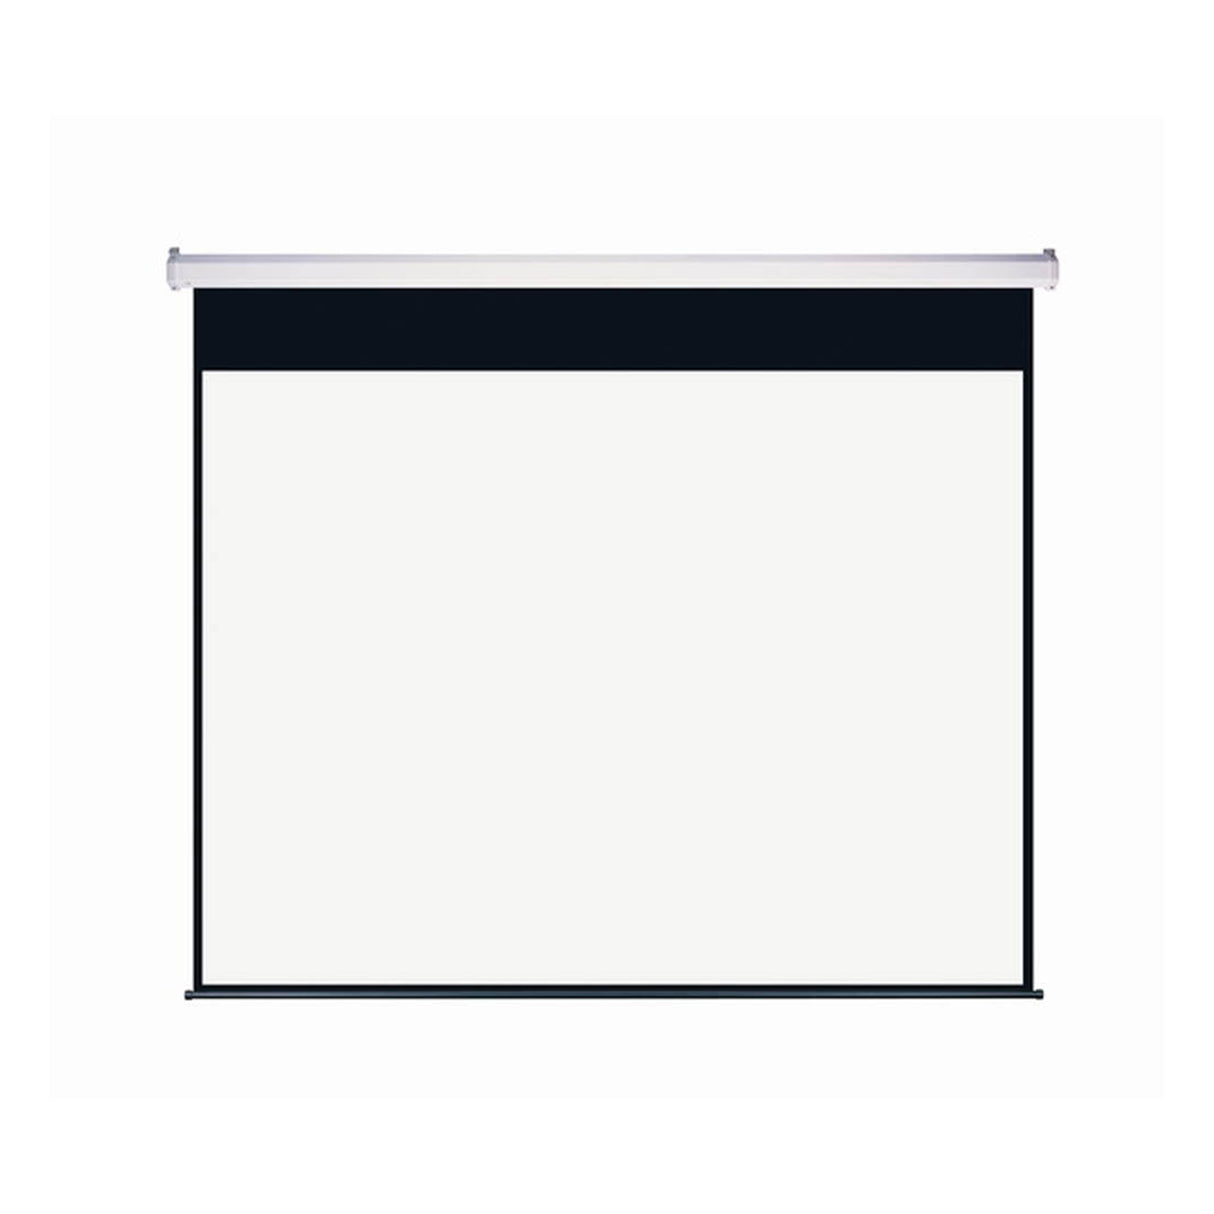 RNT Projection Screen Motorised 84 Inches - 4:3 Ratio